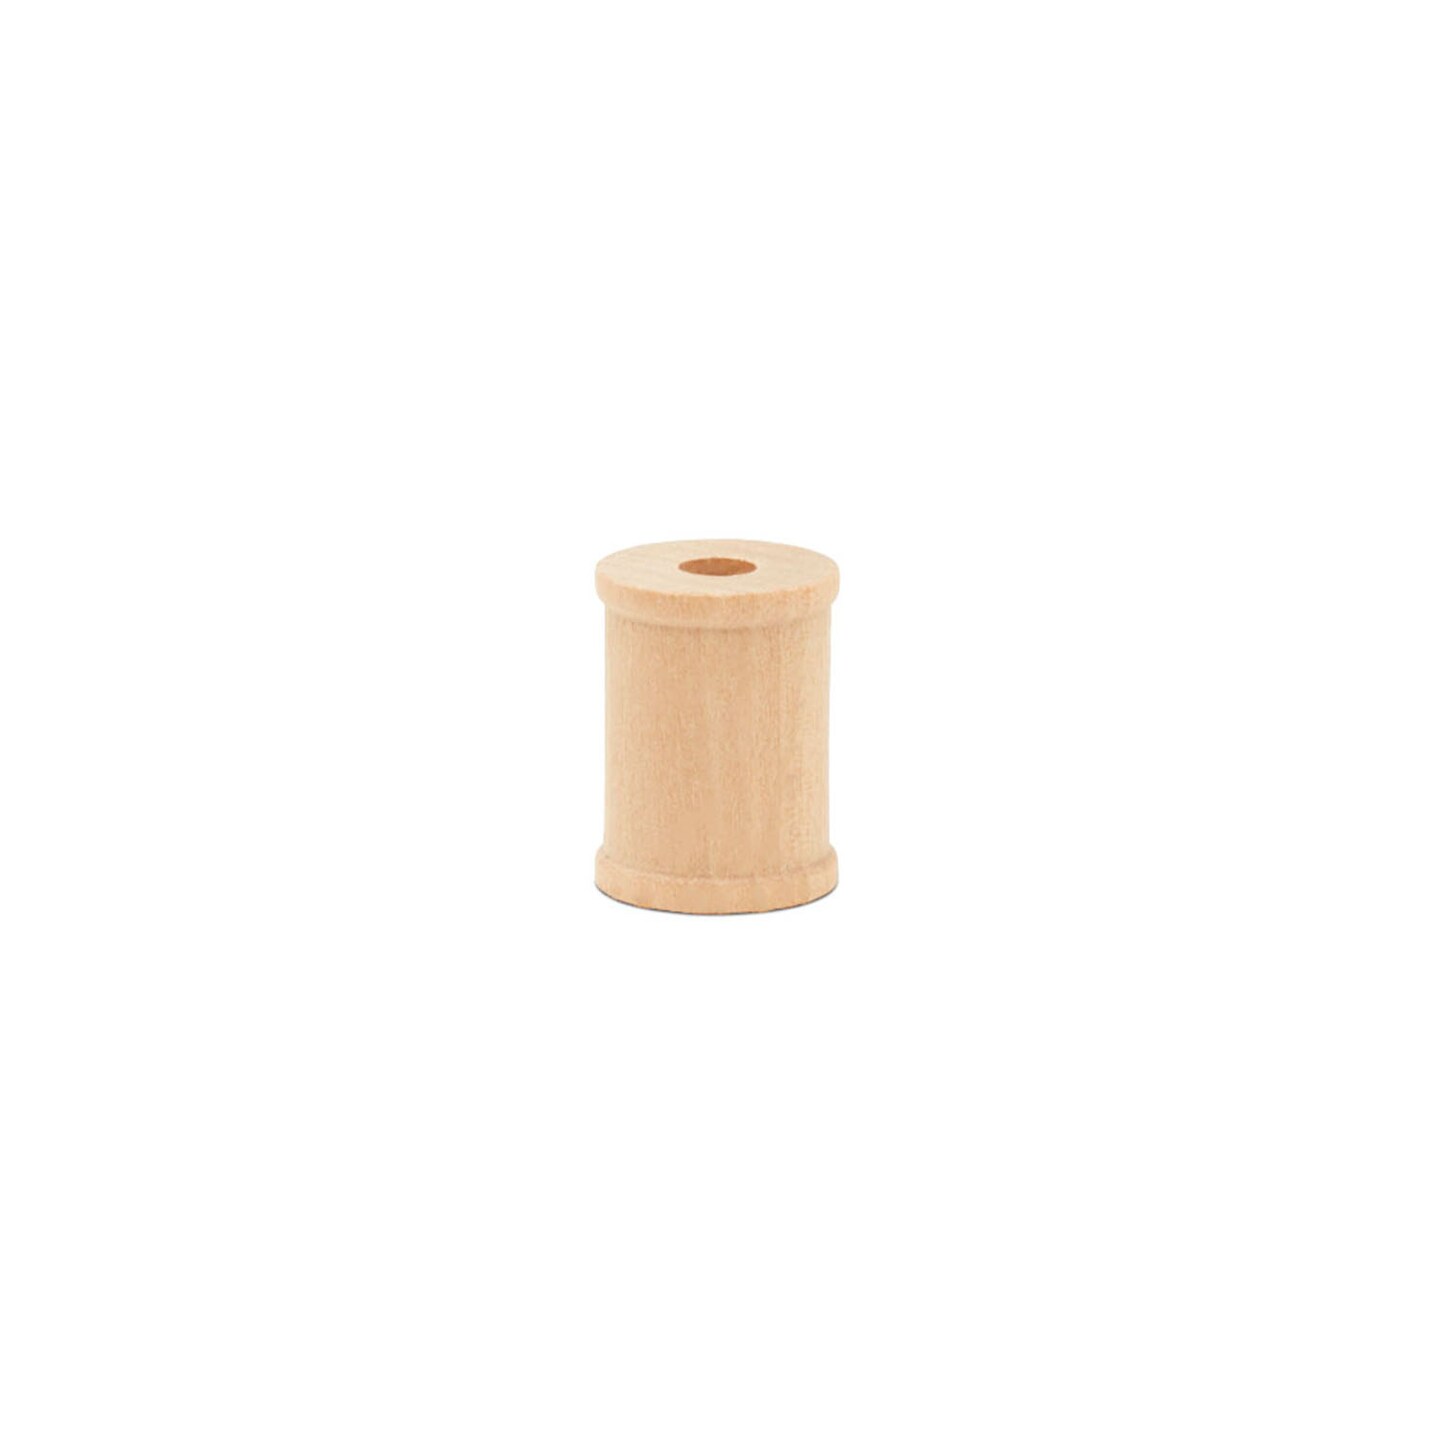 Wood Spools, Multiple Sizes Available, Unfinished, for Crafts & DIY  Projects, Woodpeckers